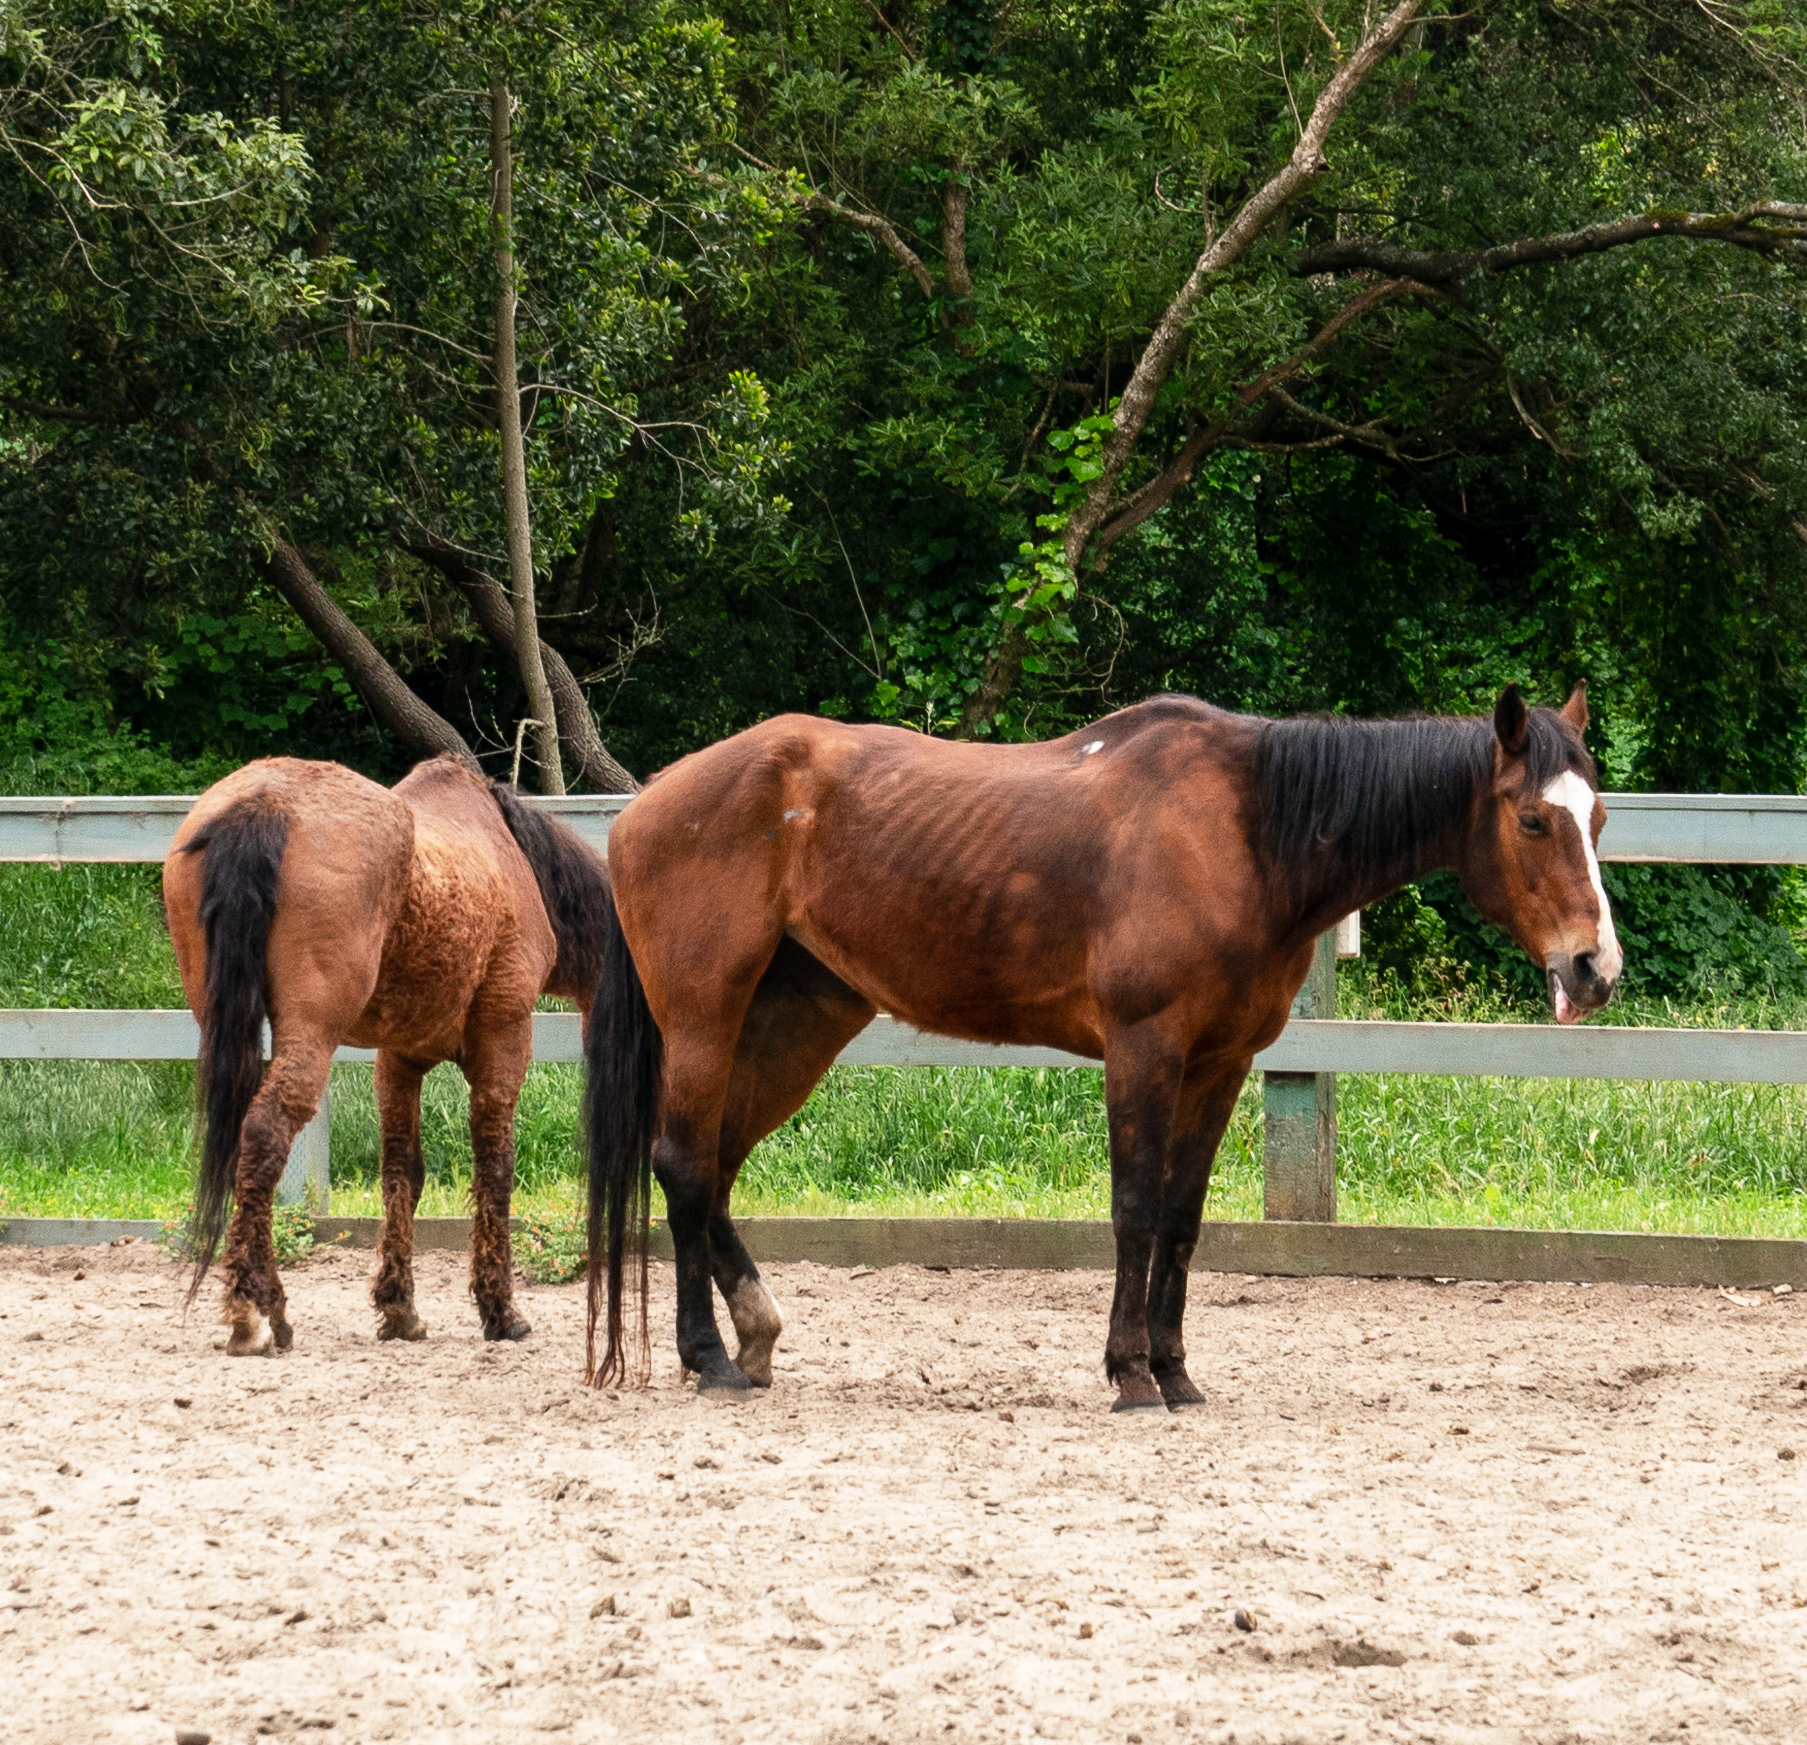 Two horses in a sandy enclosure, one facing forward and the other facing away, surrounded by lush greenery and a white fence.